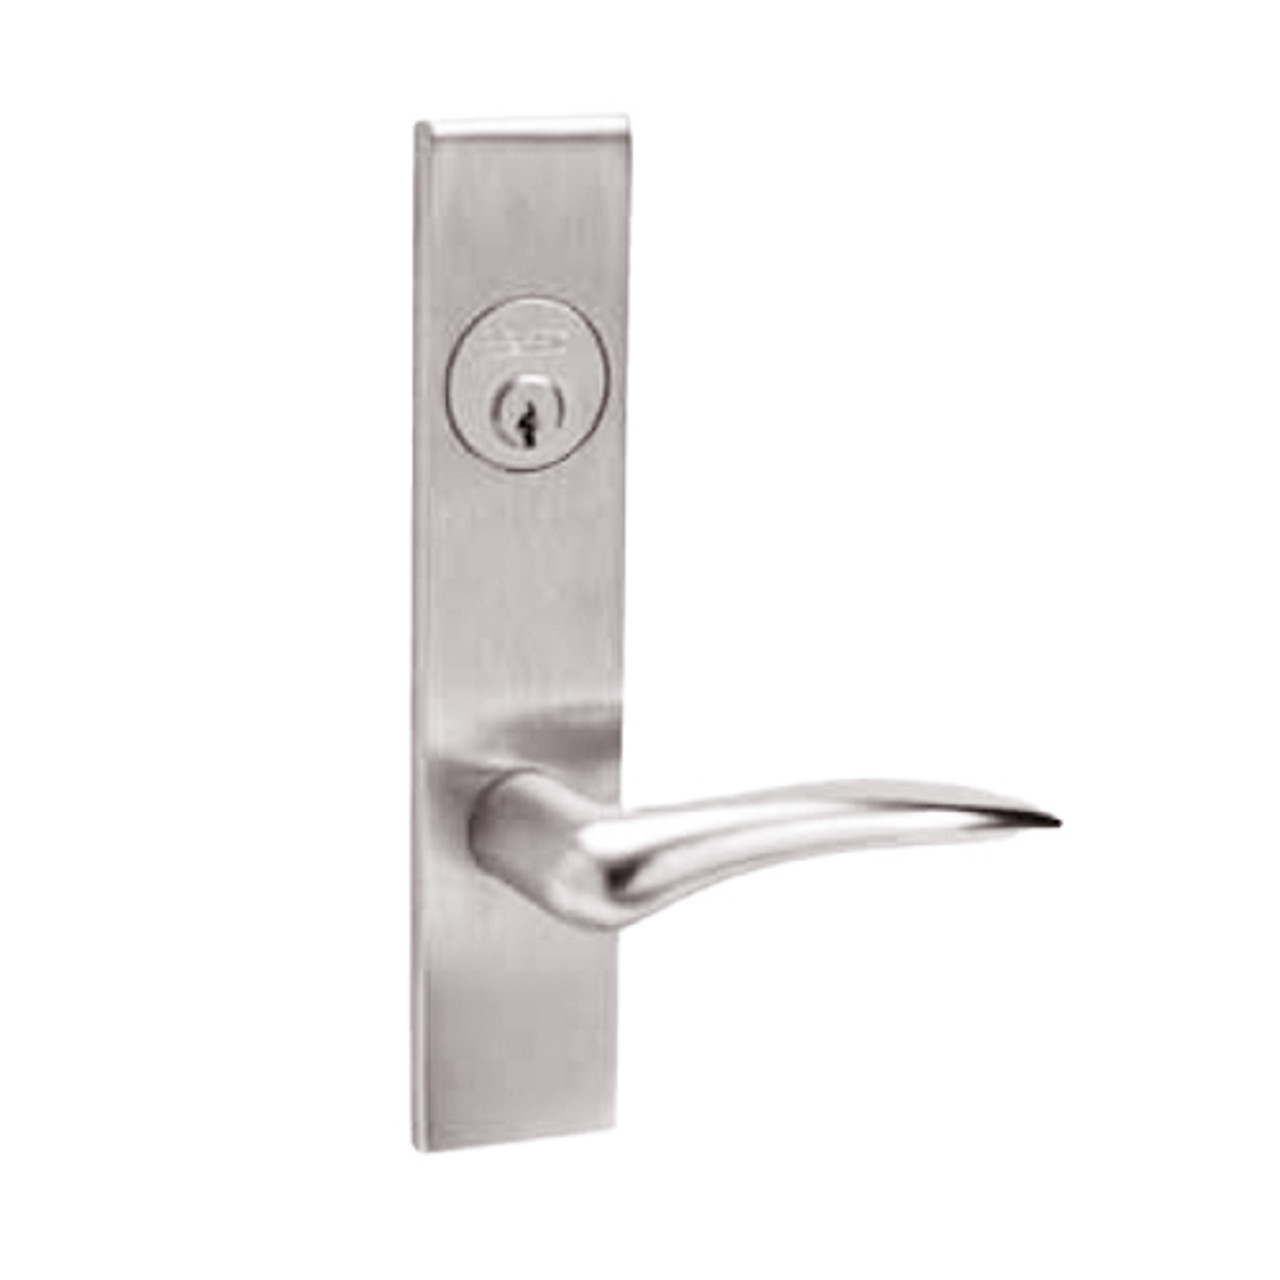 ML2054-DSR-629-LH Corbin Russwin ML2000 Series Mortise Entrance Locksets with Dirke Lever in Bright Stainless Steel